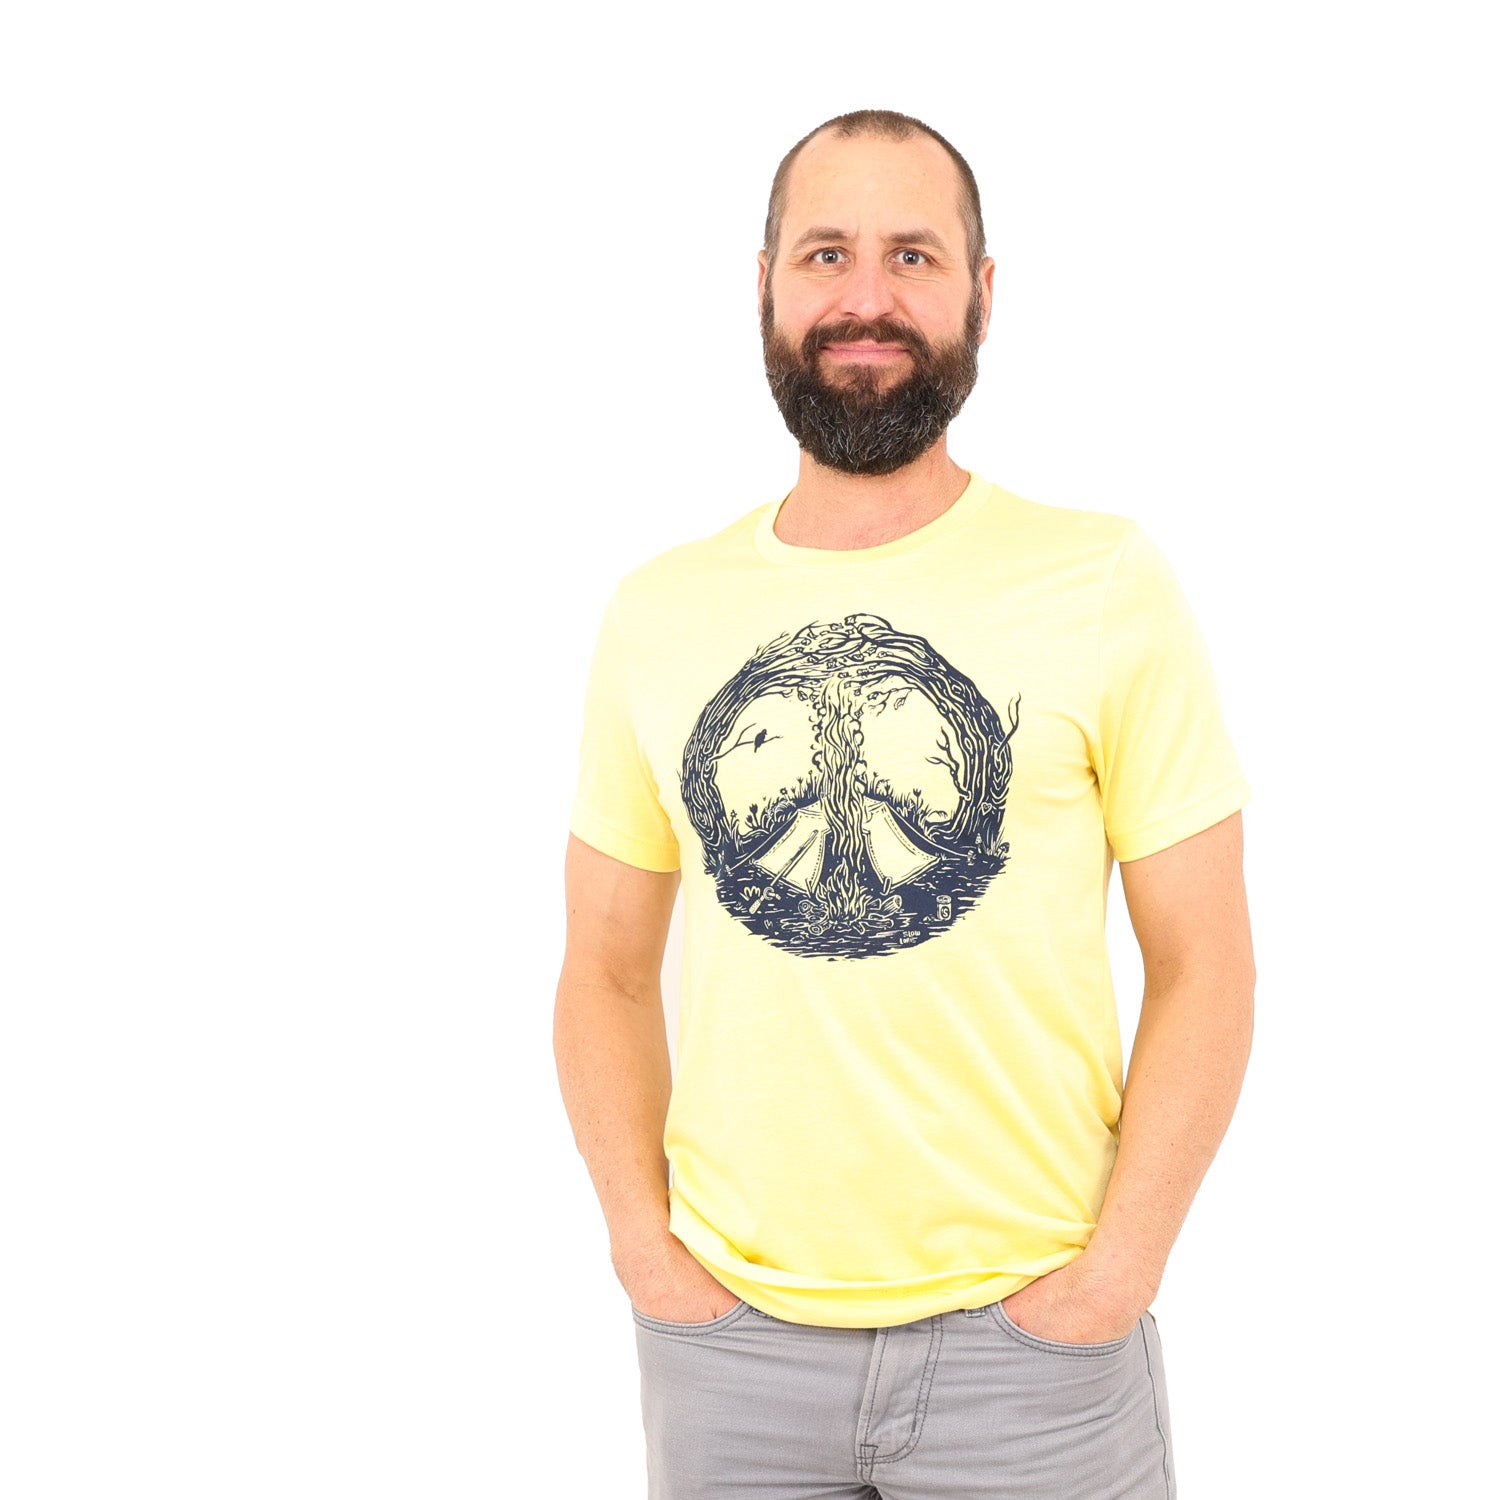 Man wearing yellow t-shirt with print is of a campfire's smoke going up the center meeting with the tops of curved in trees creating a peace sign. Tent is by the fire and a bird is on a branch